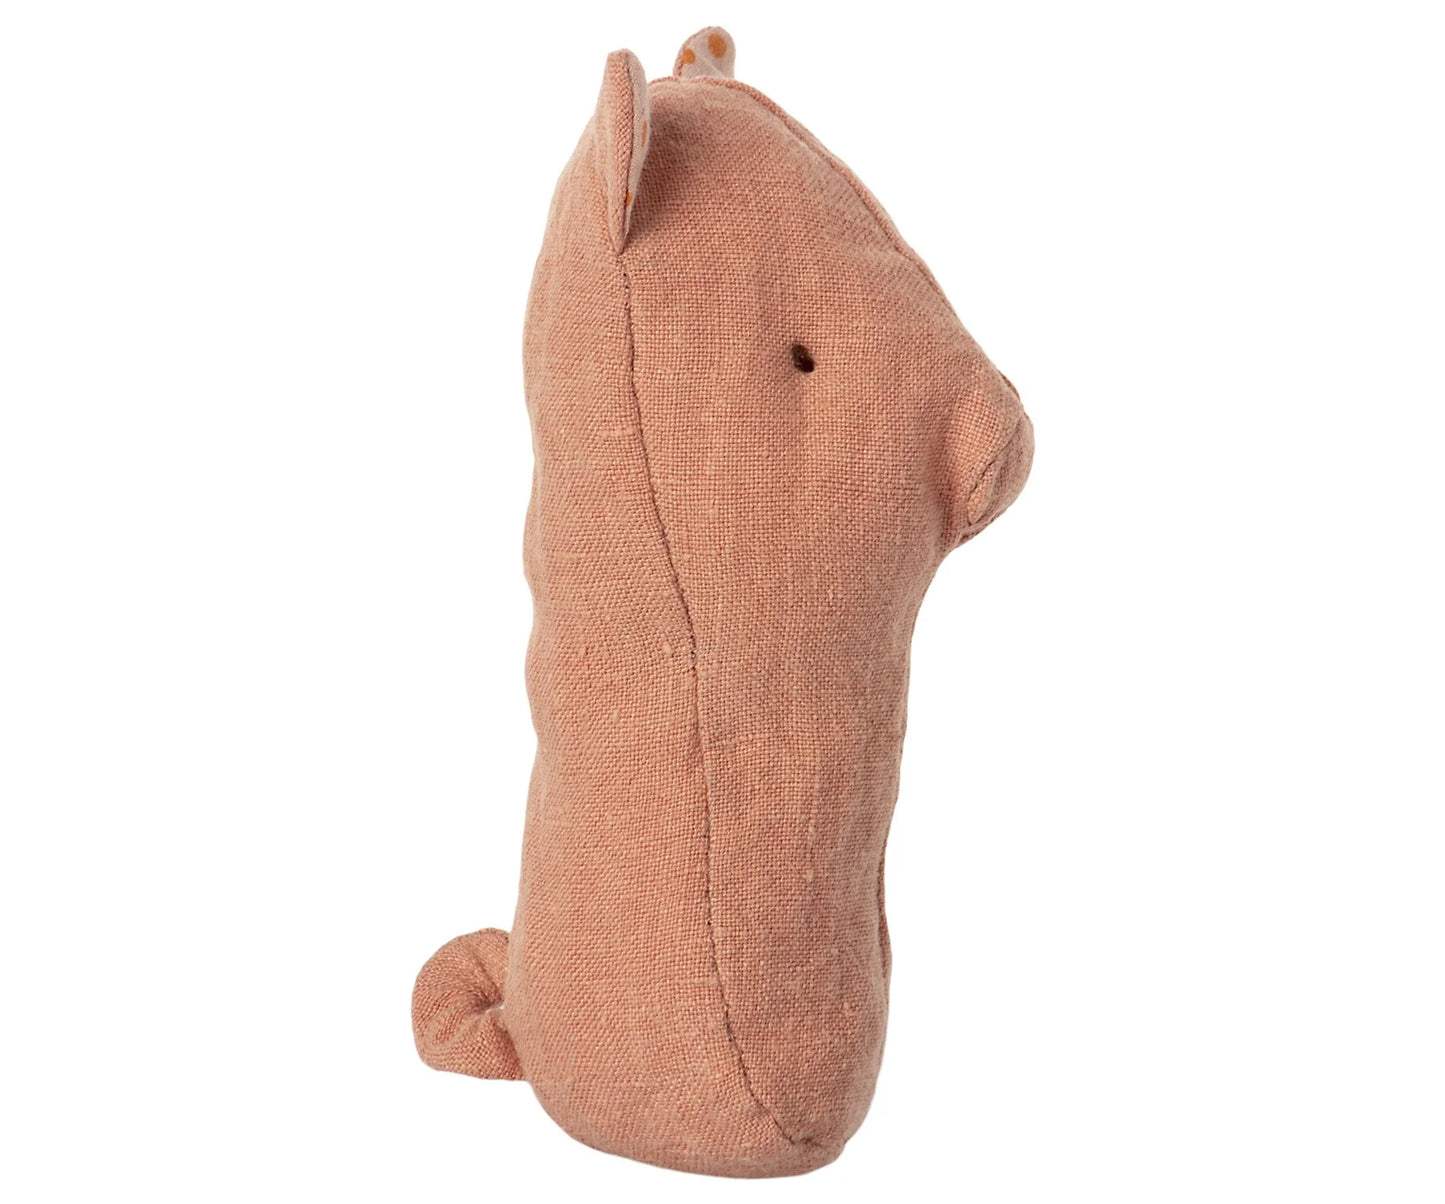 Lullaby Friends Pig Rattle